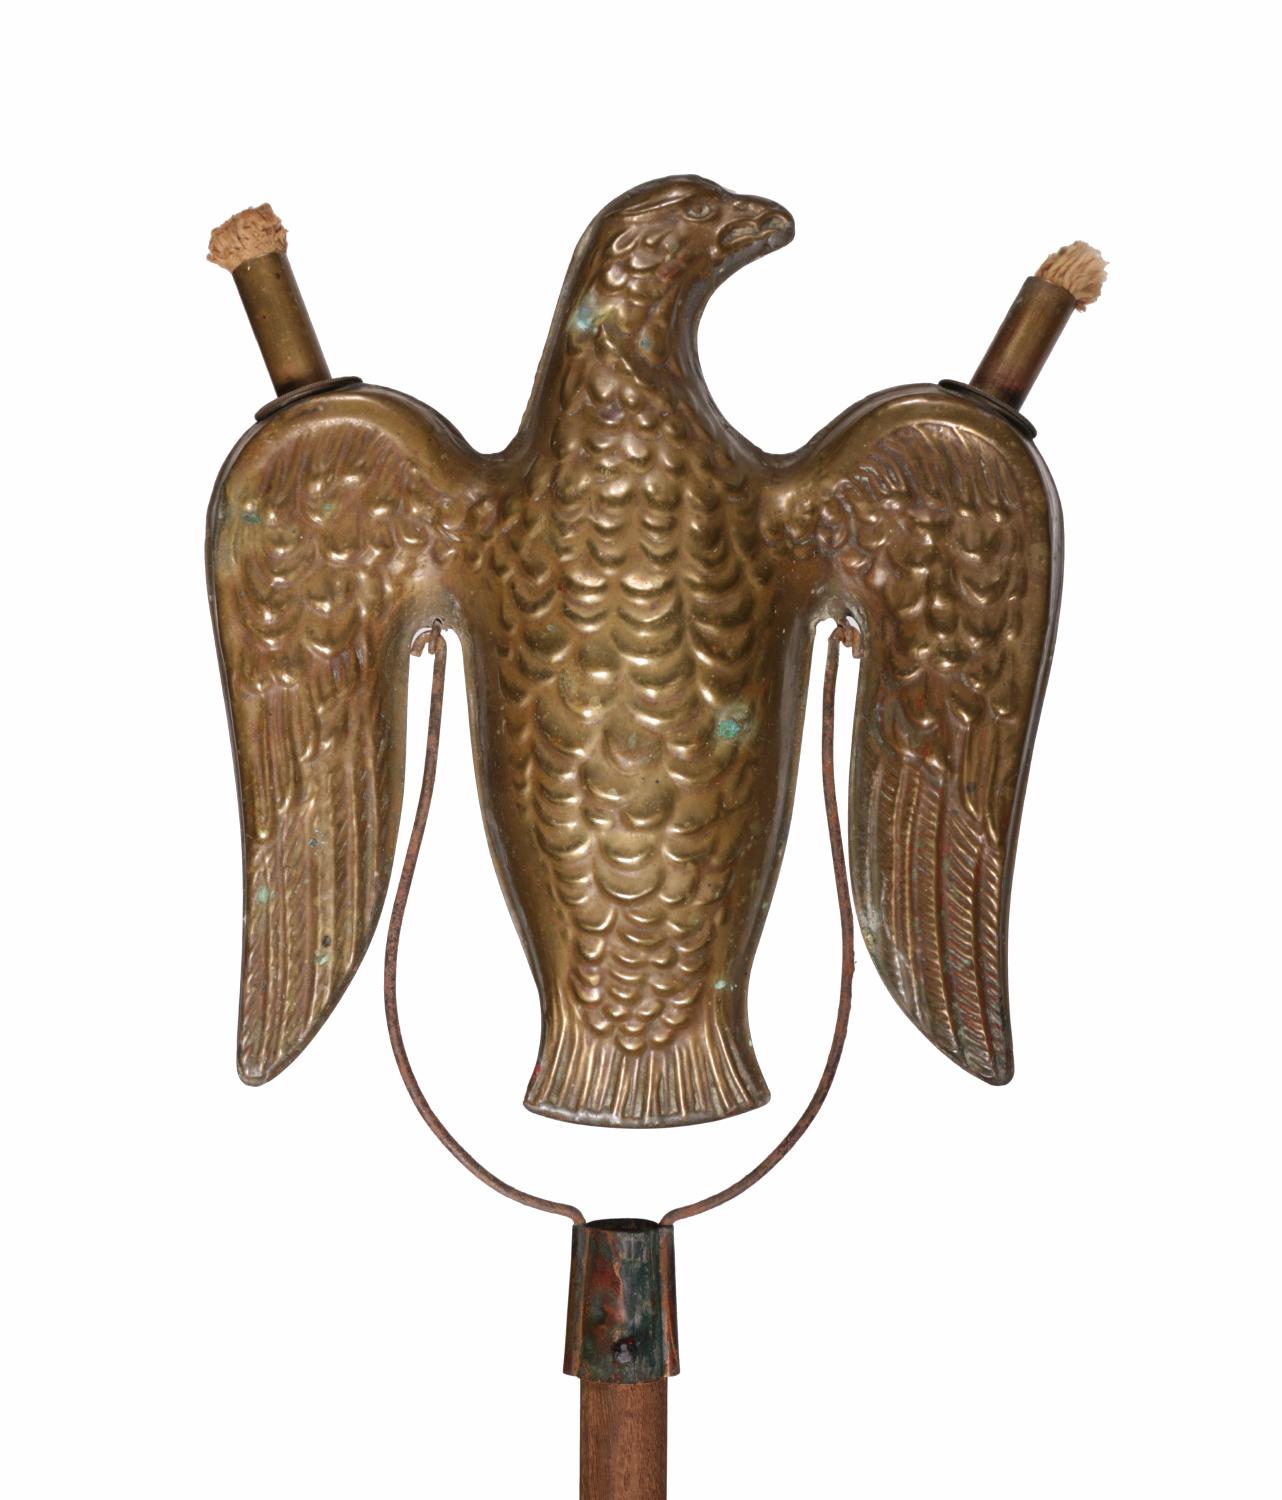 American Eagle Parade Torch from the 1860 or 1864 Campaign of Abraham Lincoln